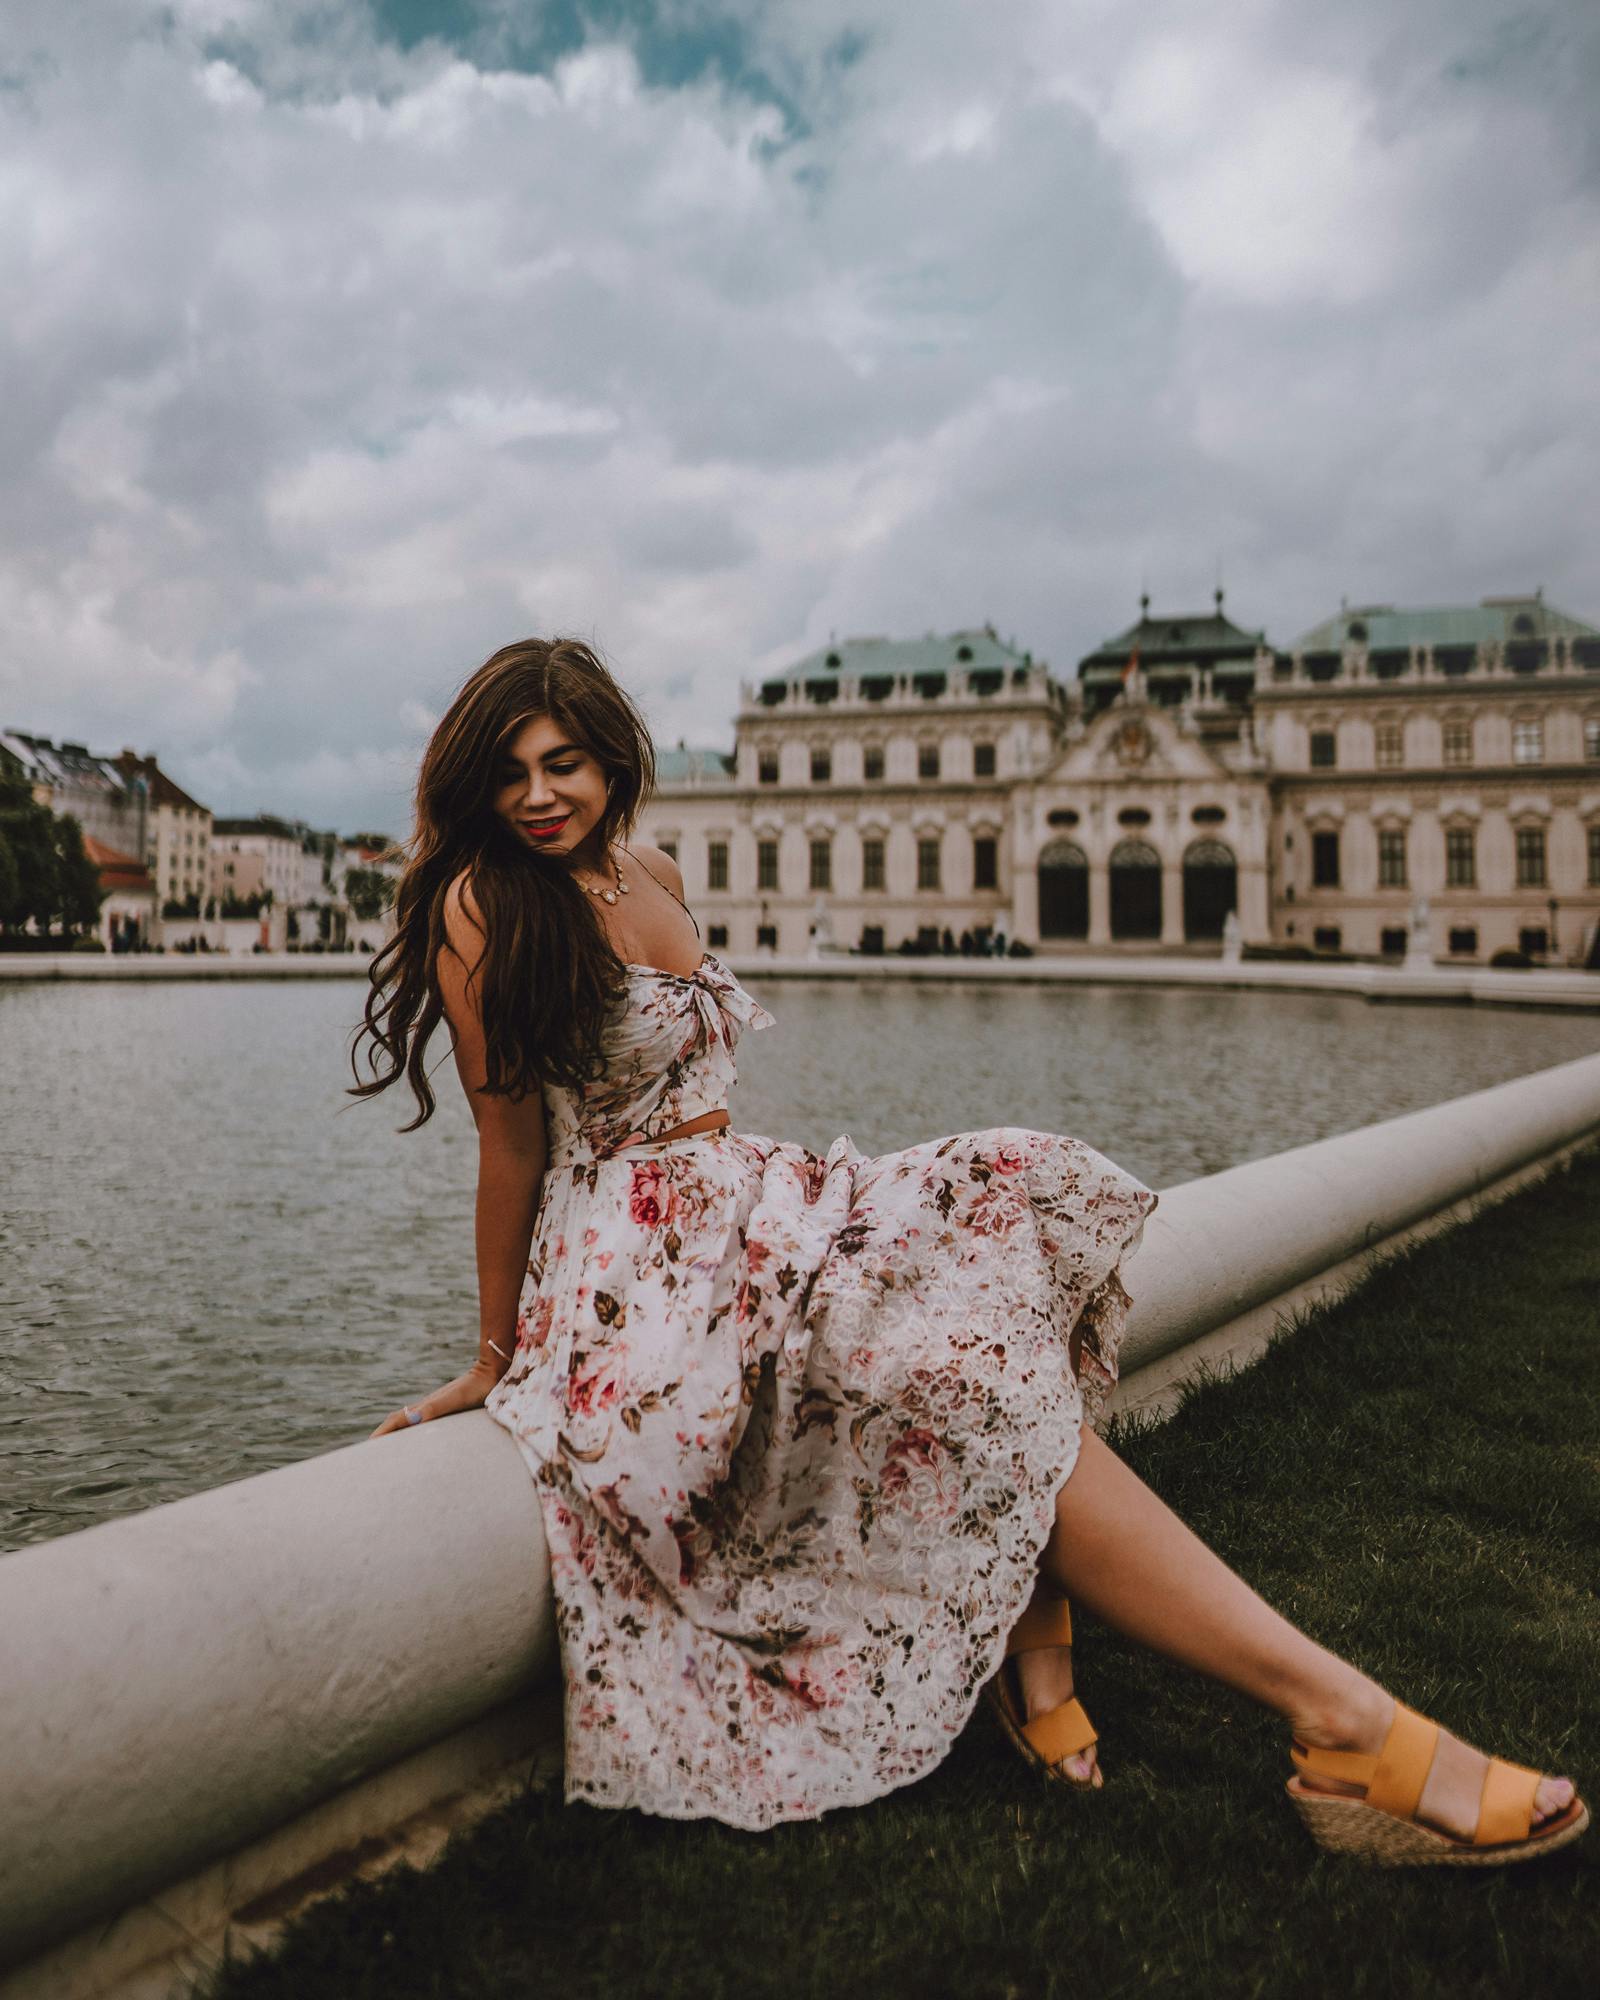 Photo Guide: The Top 16 Most Instagrammable Places in Vienna, Austria